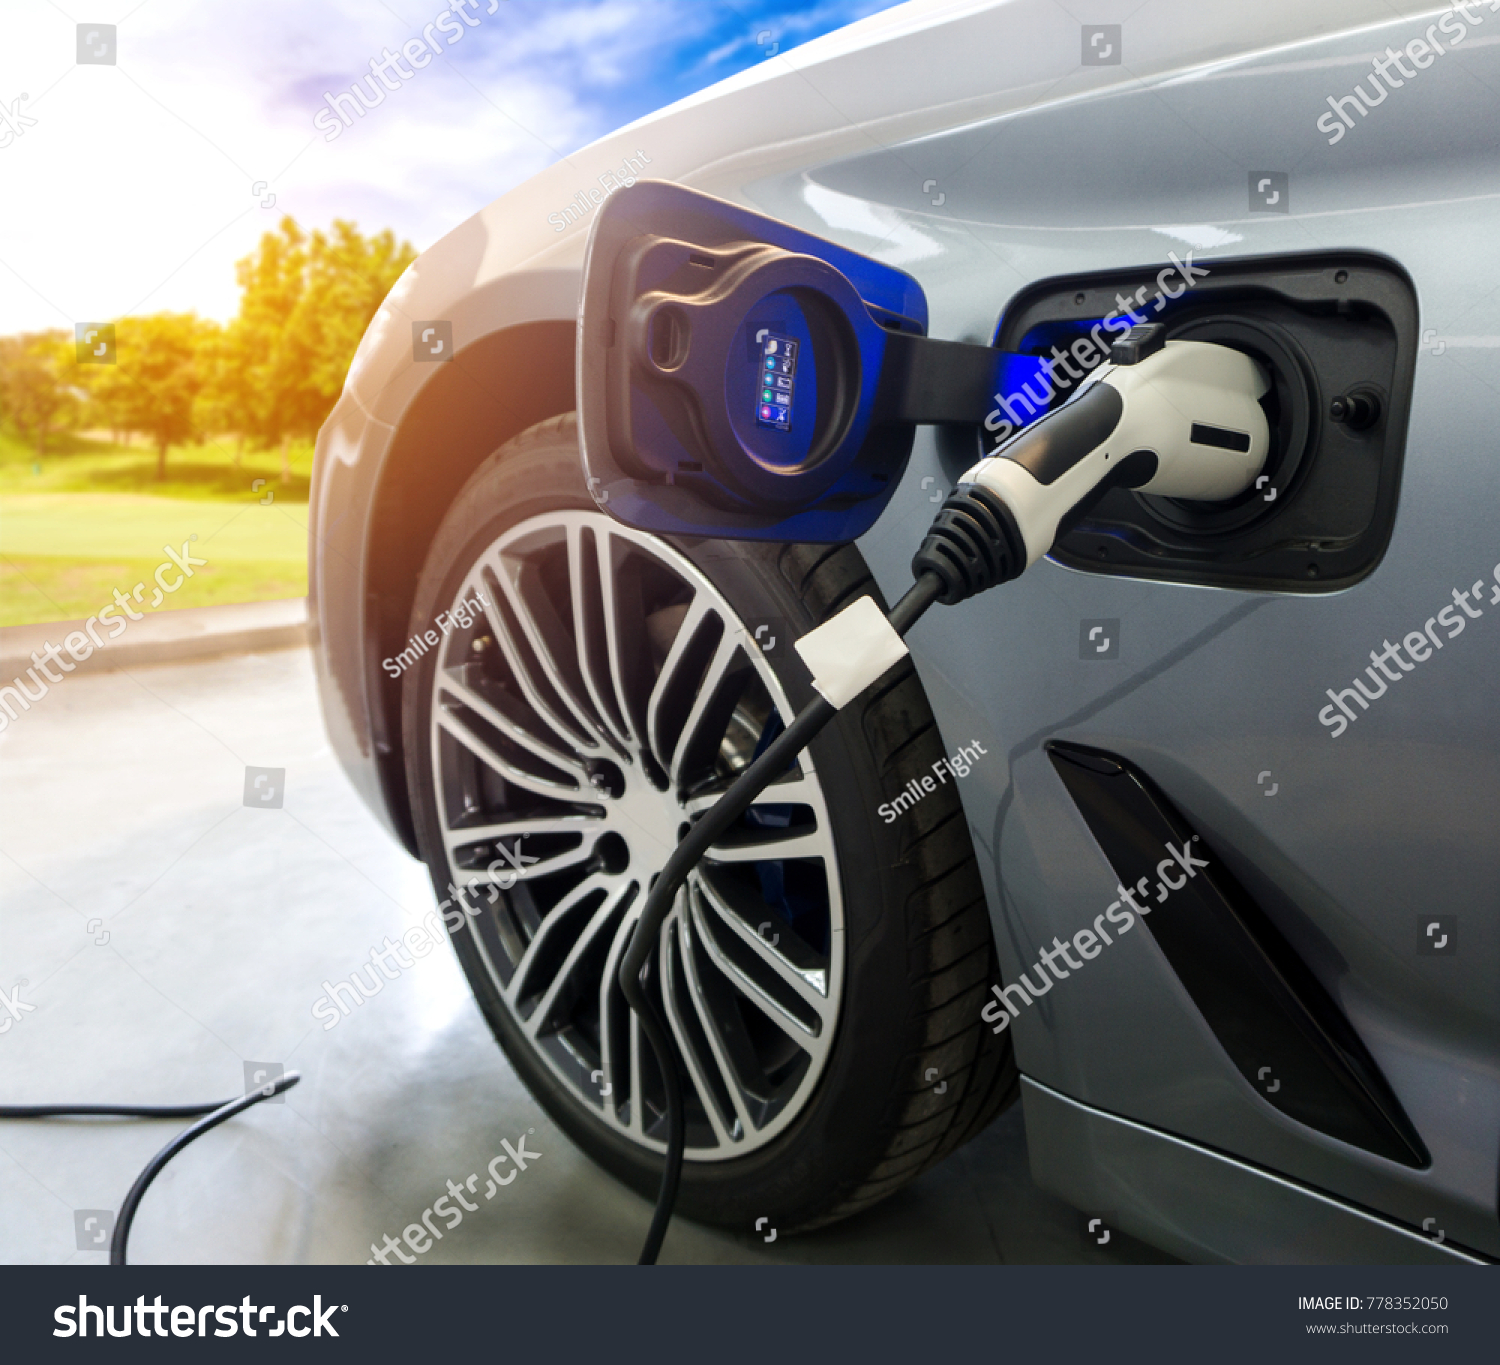 EV Car or Electric car at charging station with the power cable supply plugged in on blurred nature with sun light background. Eco-friendly alternative energy concept #778352050